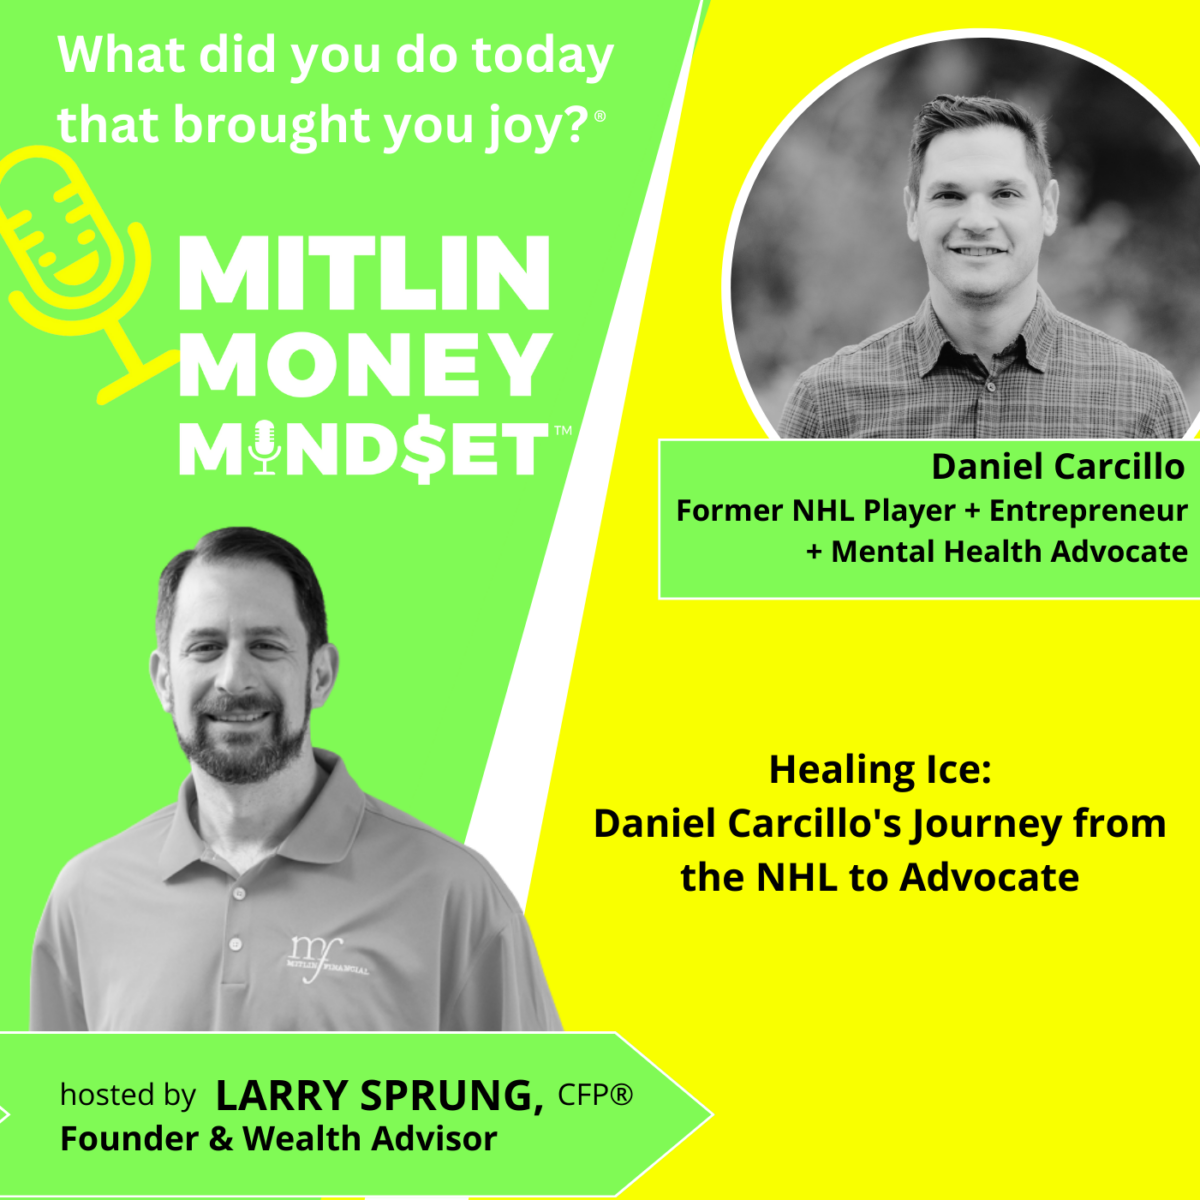 Healing Ice: Dan Carcillo’s Journey from the NHL to Advocate, Episode #179